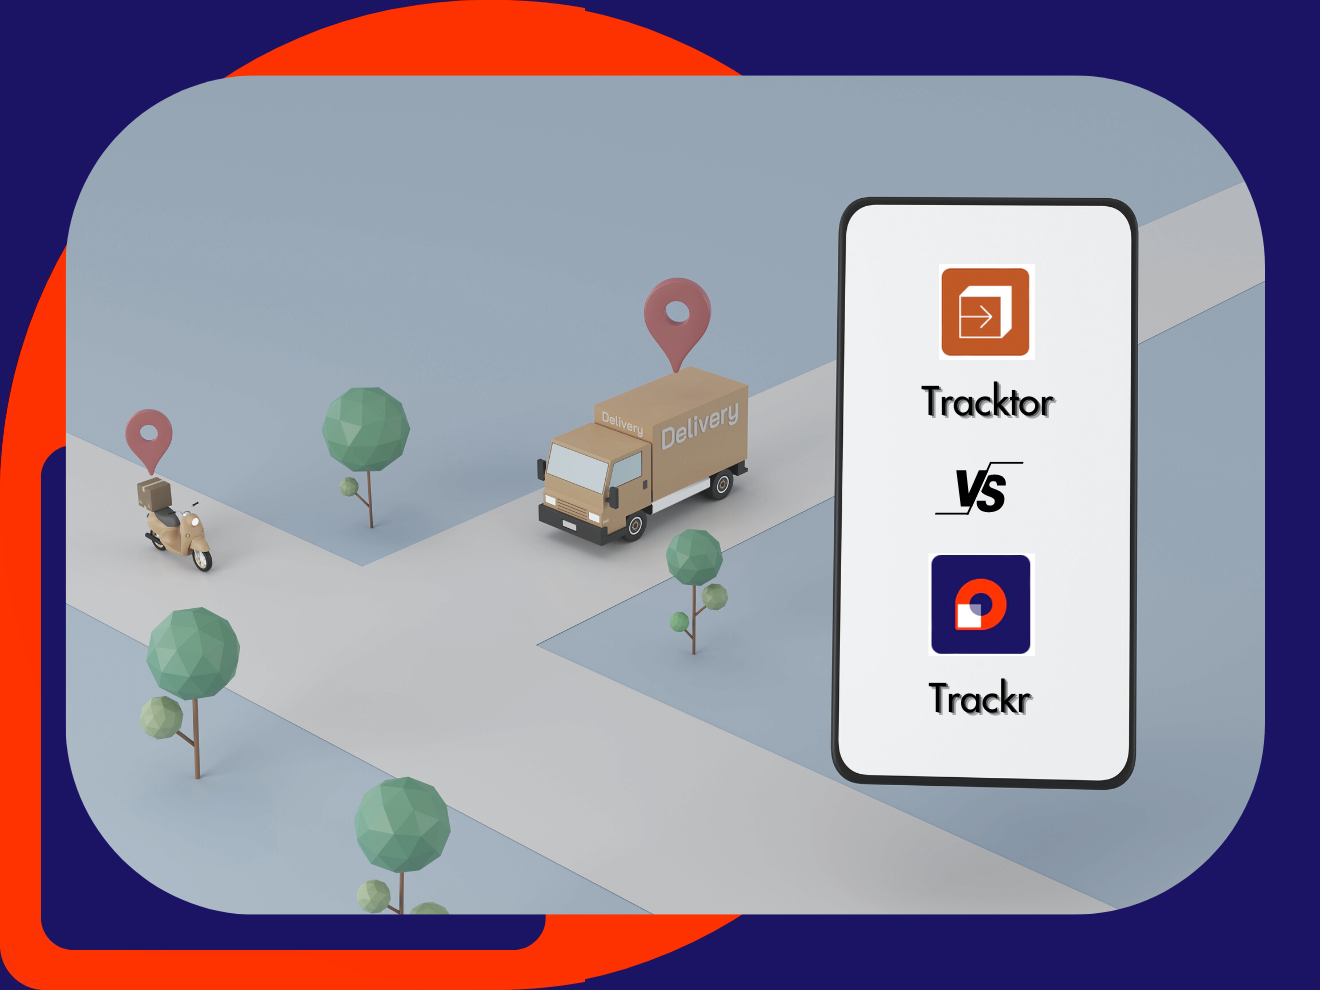 Trackr Vs. Tracktor: Which is best for your Shopify store?